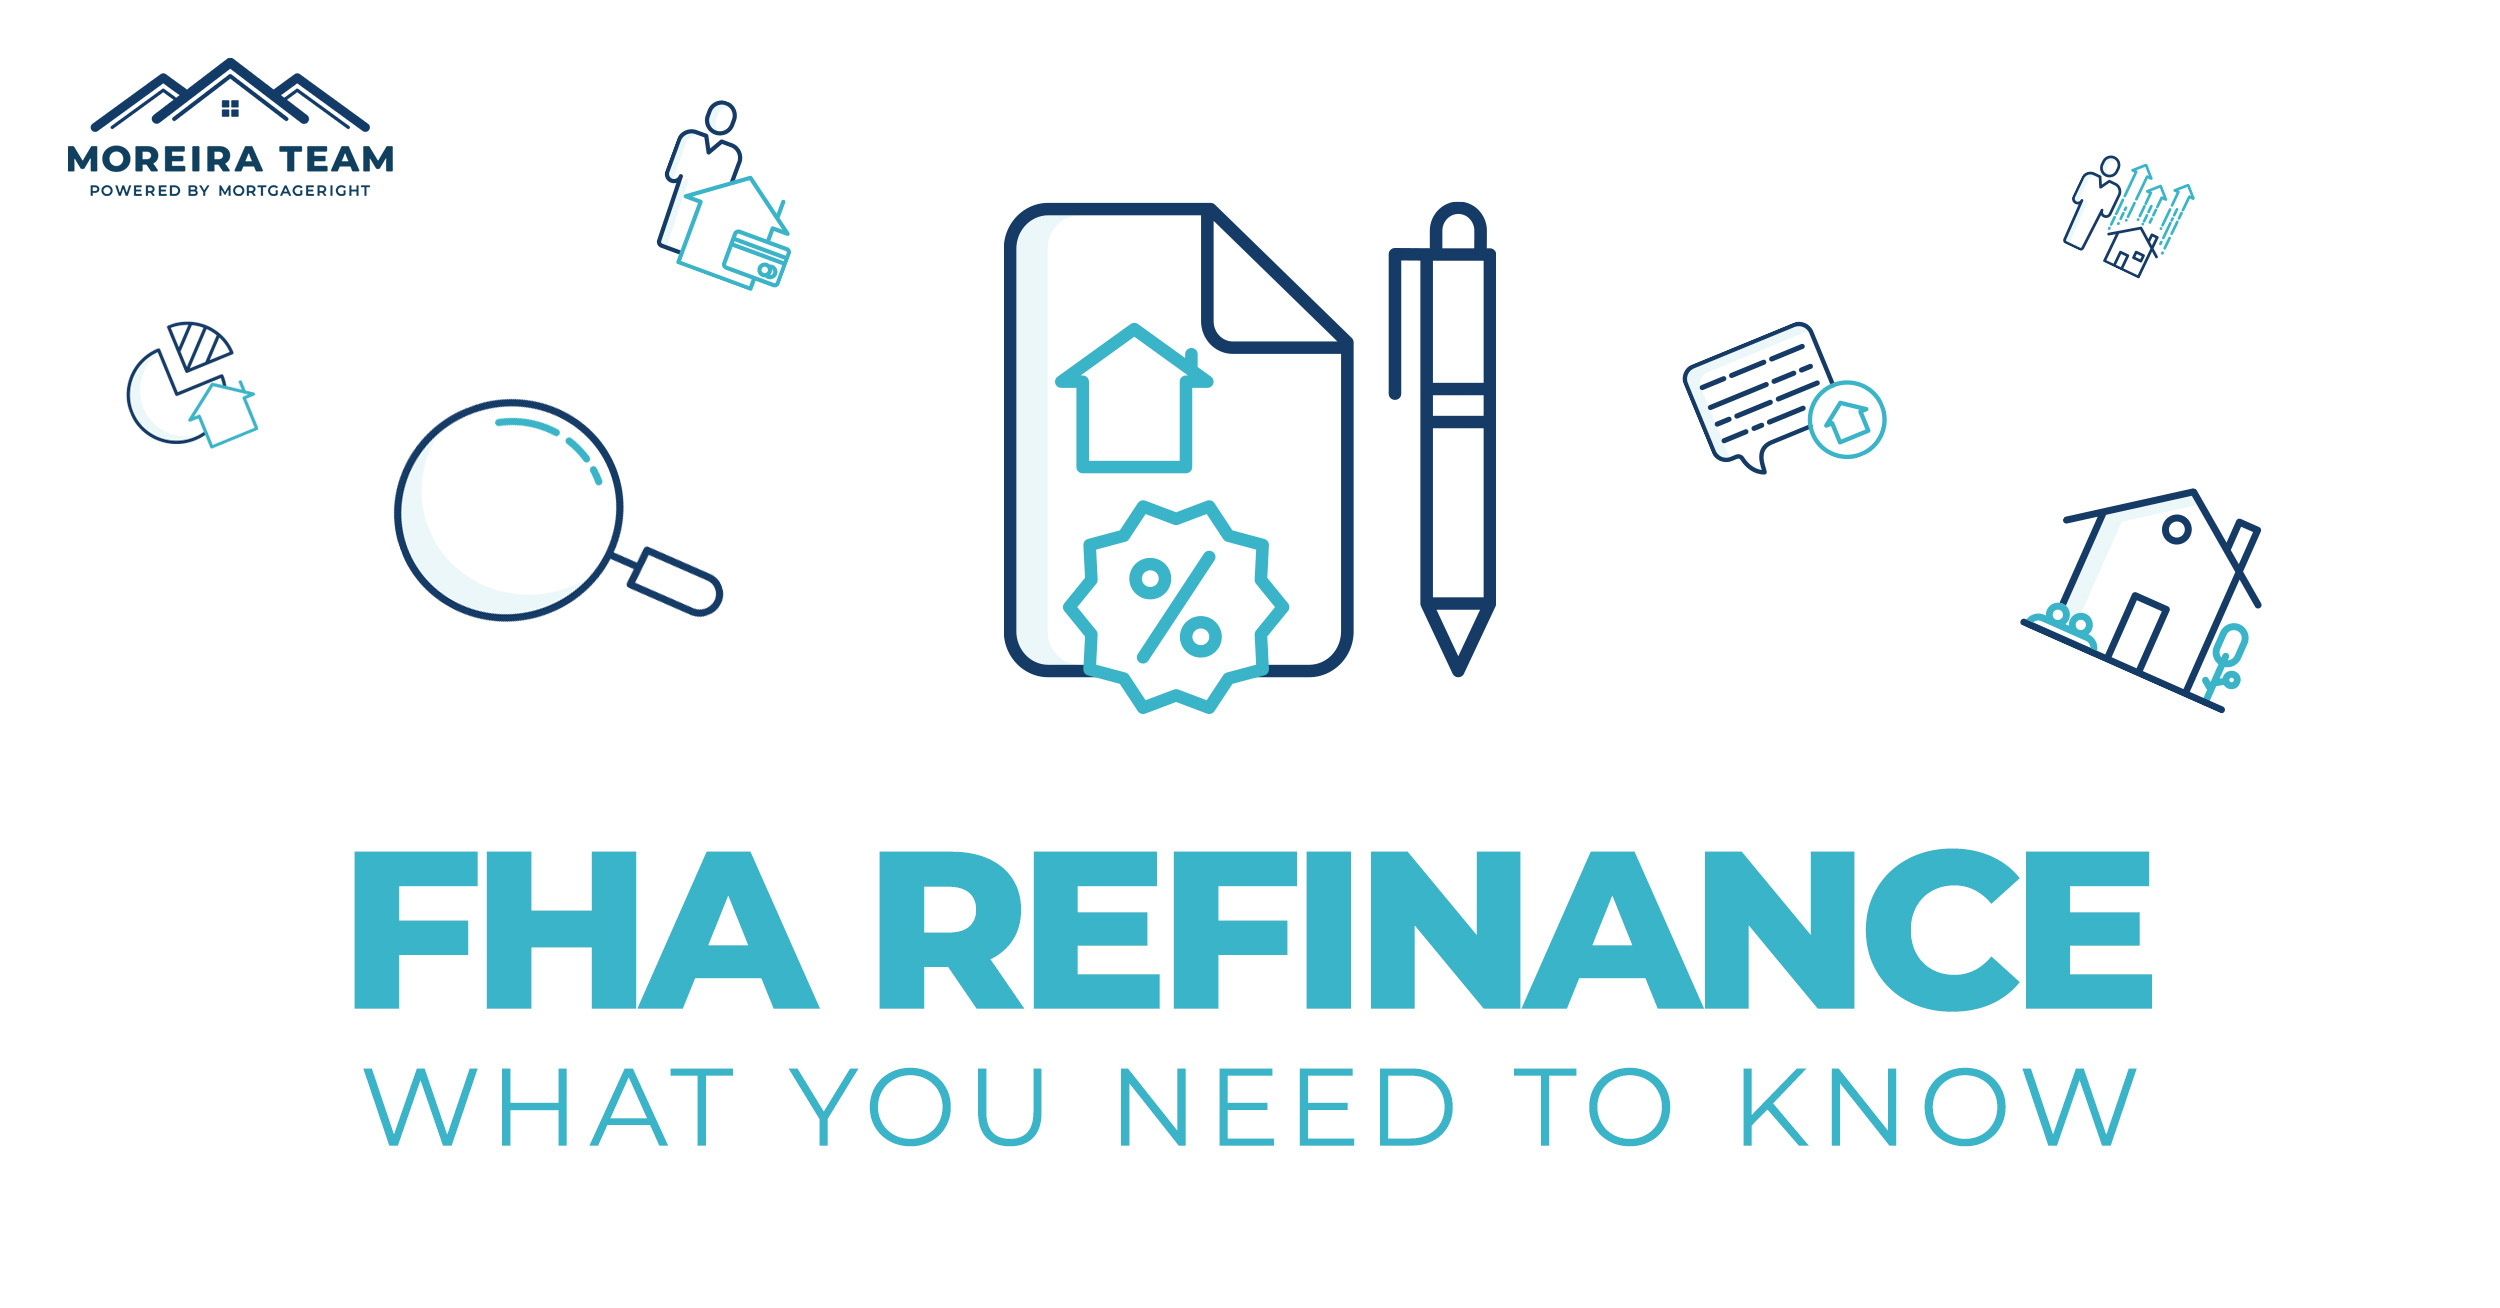 FHA Refinance what you need to know